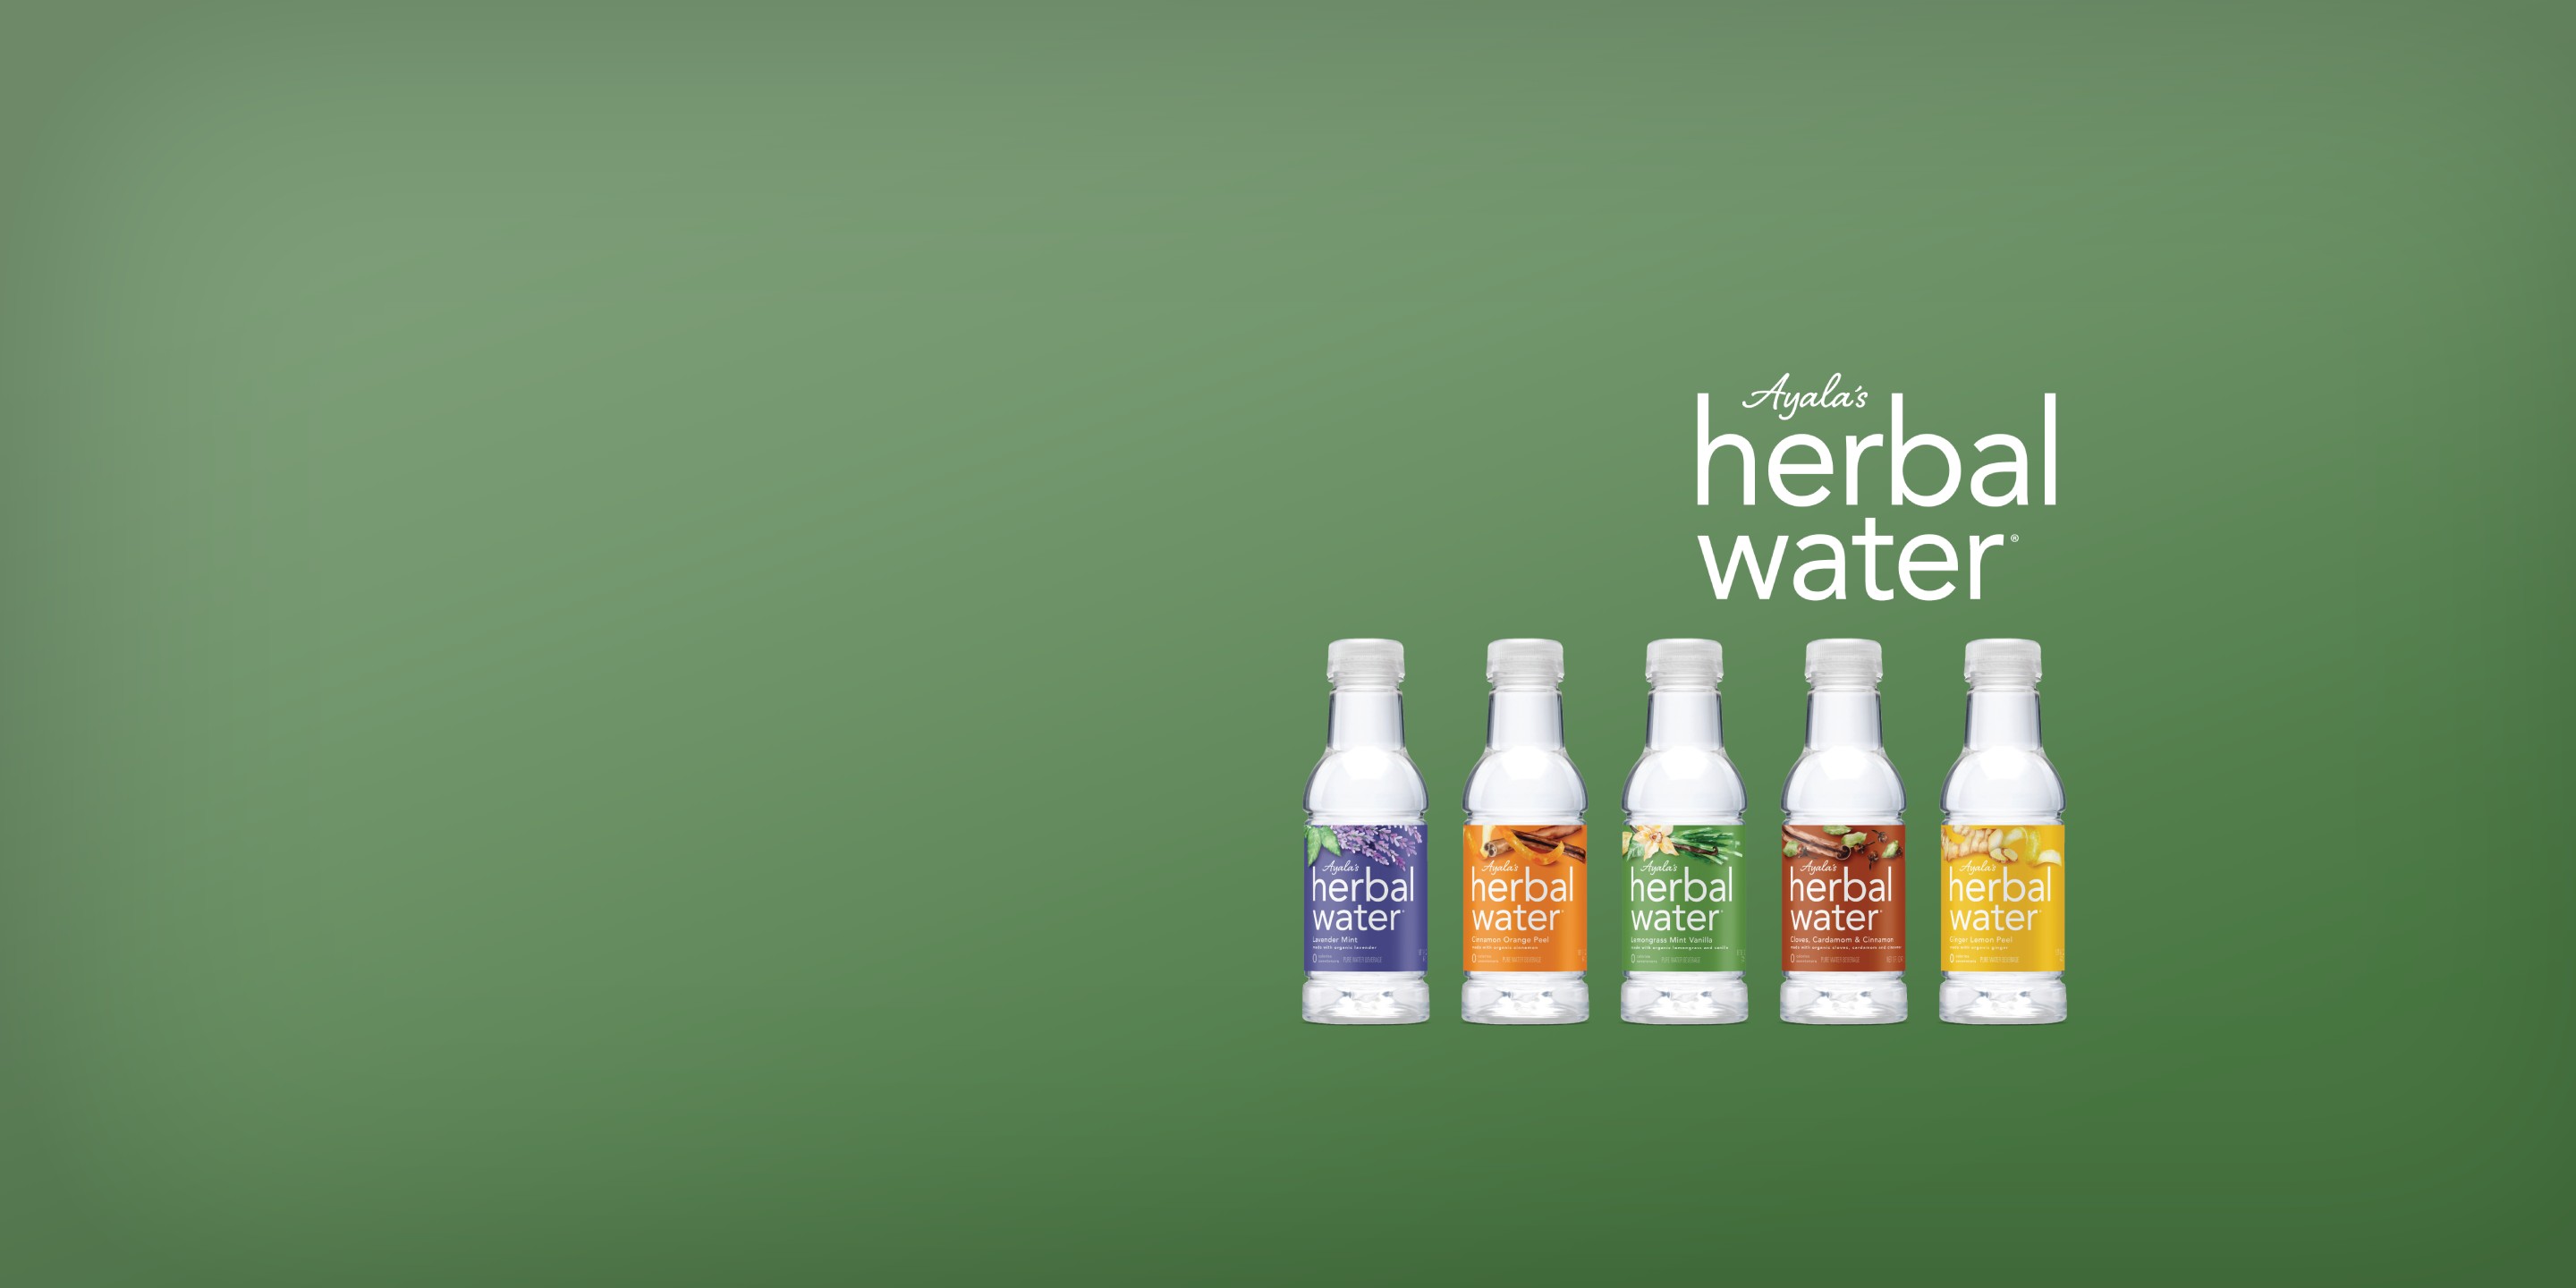 Herbal Water: Flavored Water with Herbal Extracts